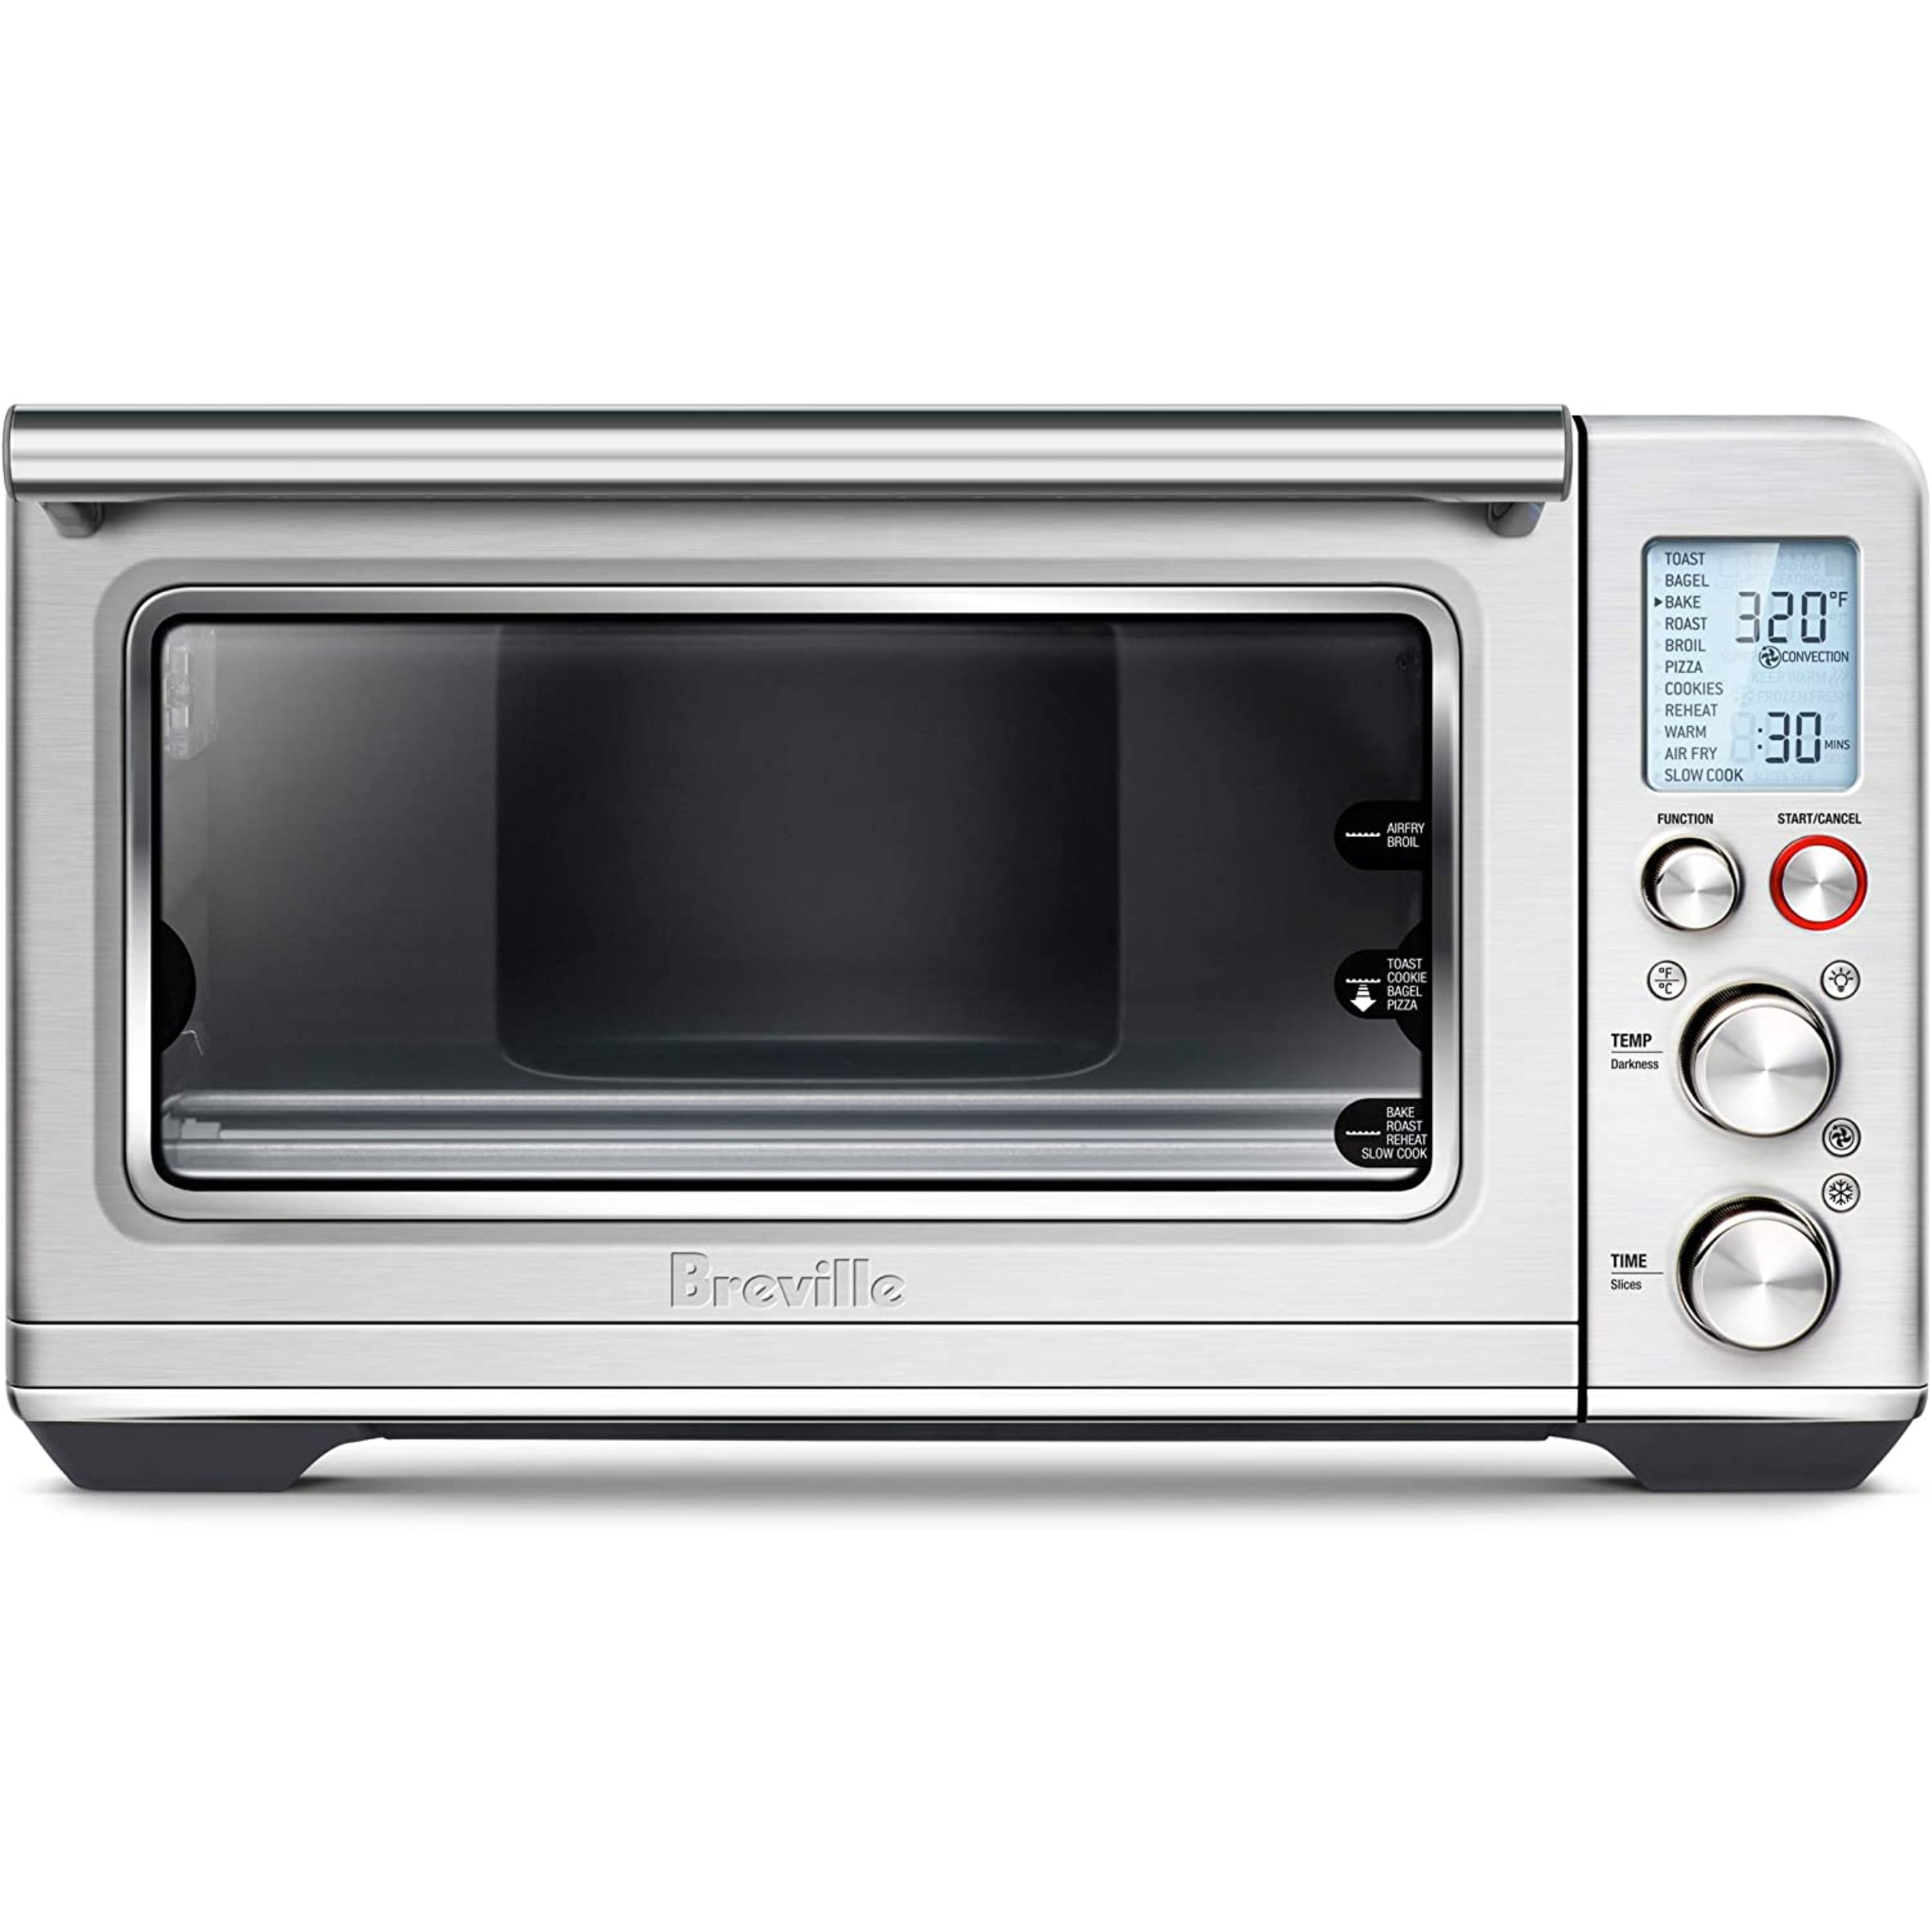 Smart Convection Oven - Small Countertop Oven